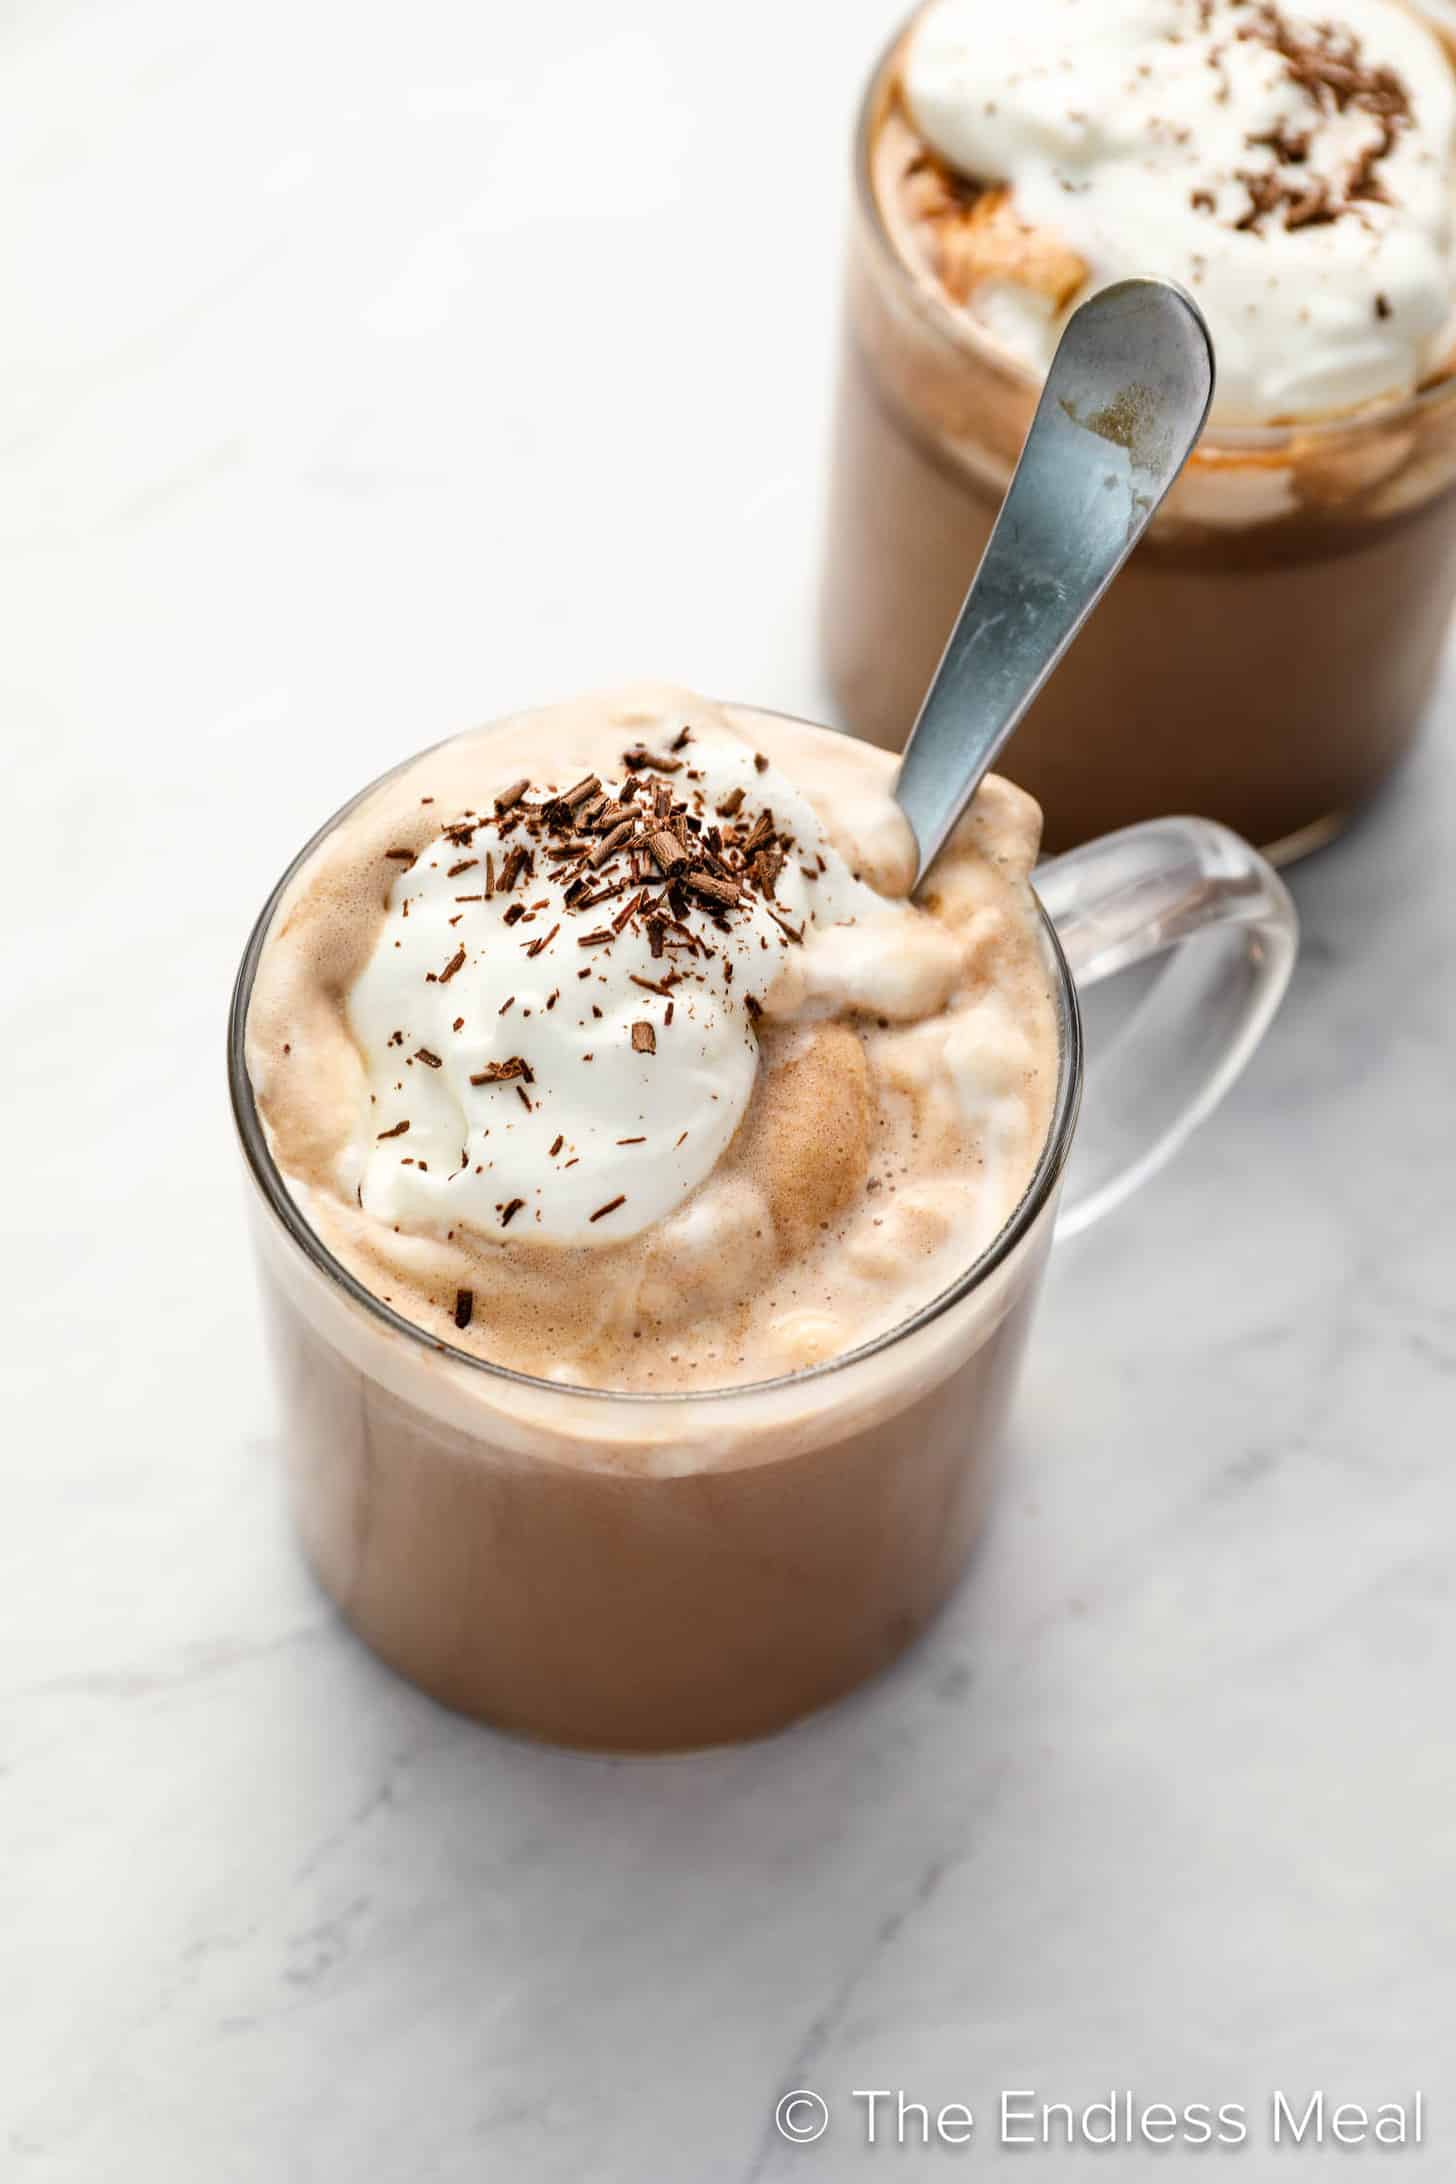 Two mugs of Spiked Hot Chocolate with whipped cream